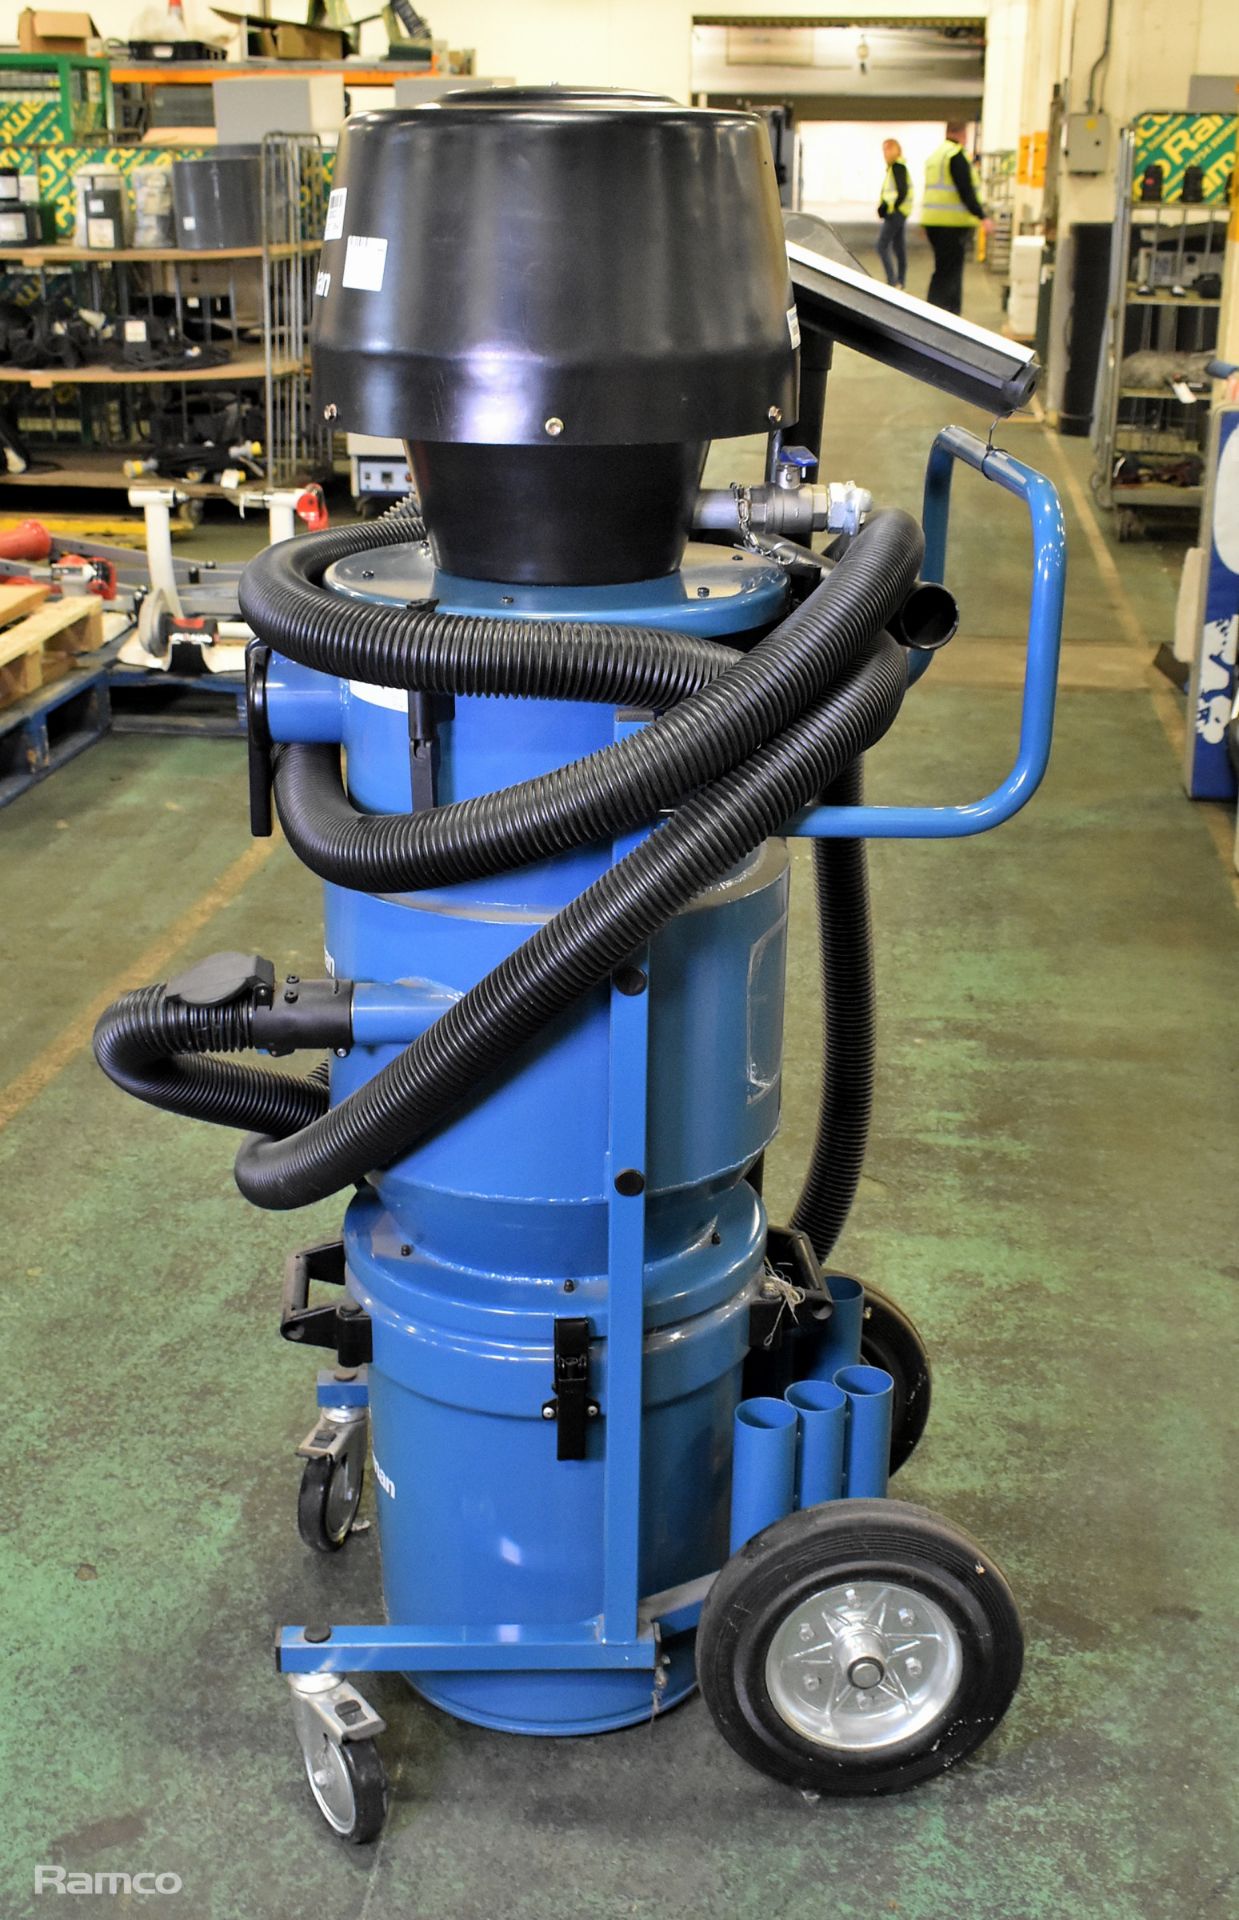 Nederman 216A industrial mobile vacuum cleaner - 8 bar - Image 3 of 6